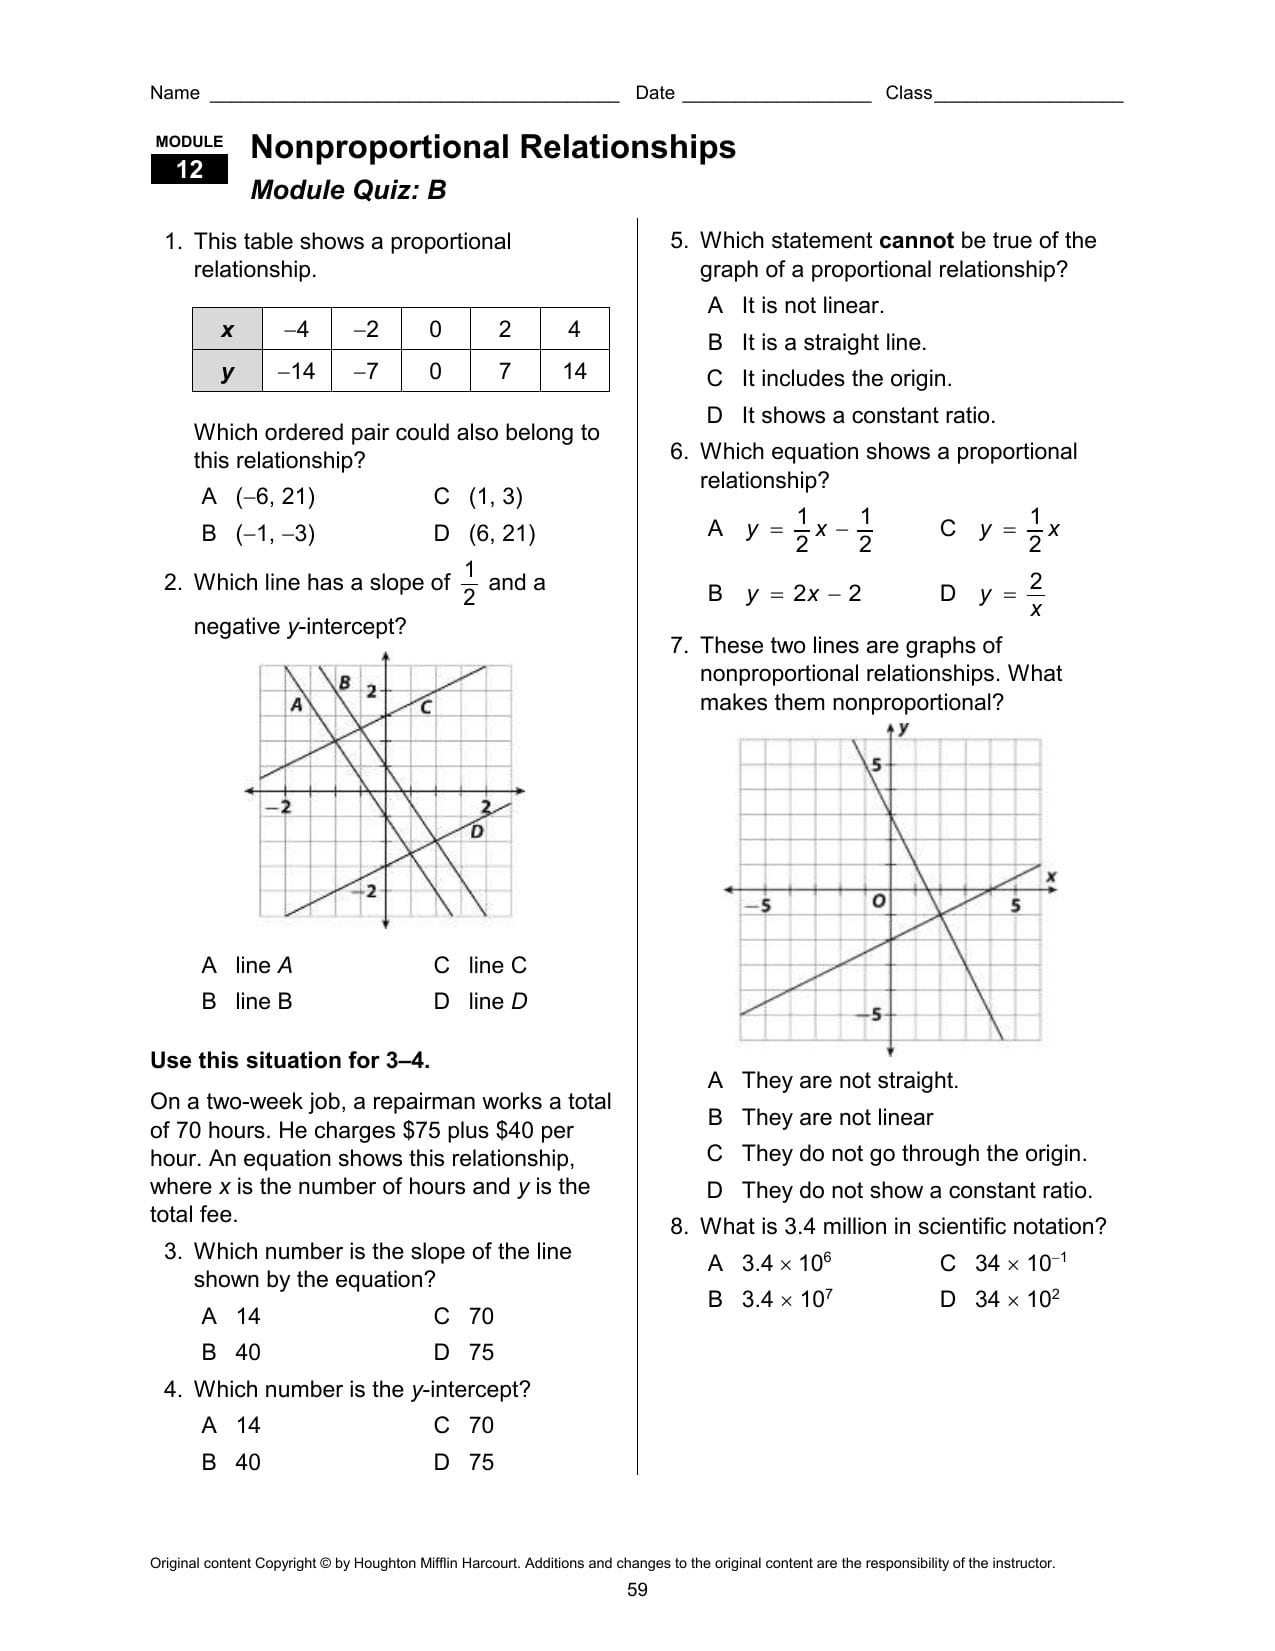 representing-linear-non-proportional-relationships-worksheet-db-excel